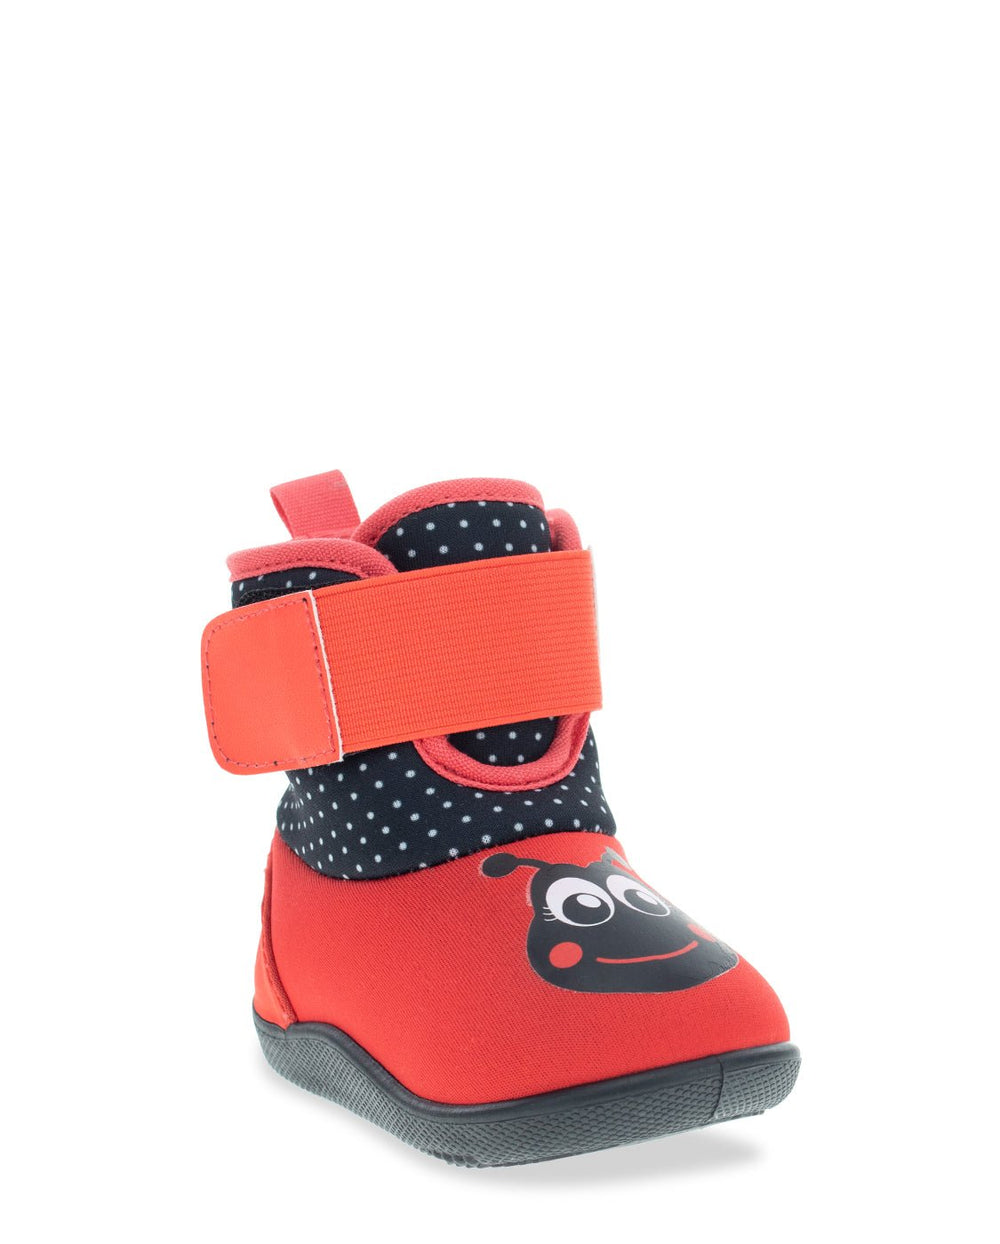 Kids Lucy Ladybug Baby Boot - Red - Western Chief